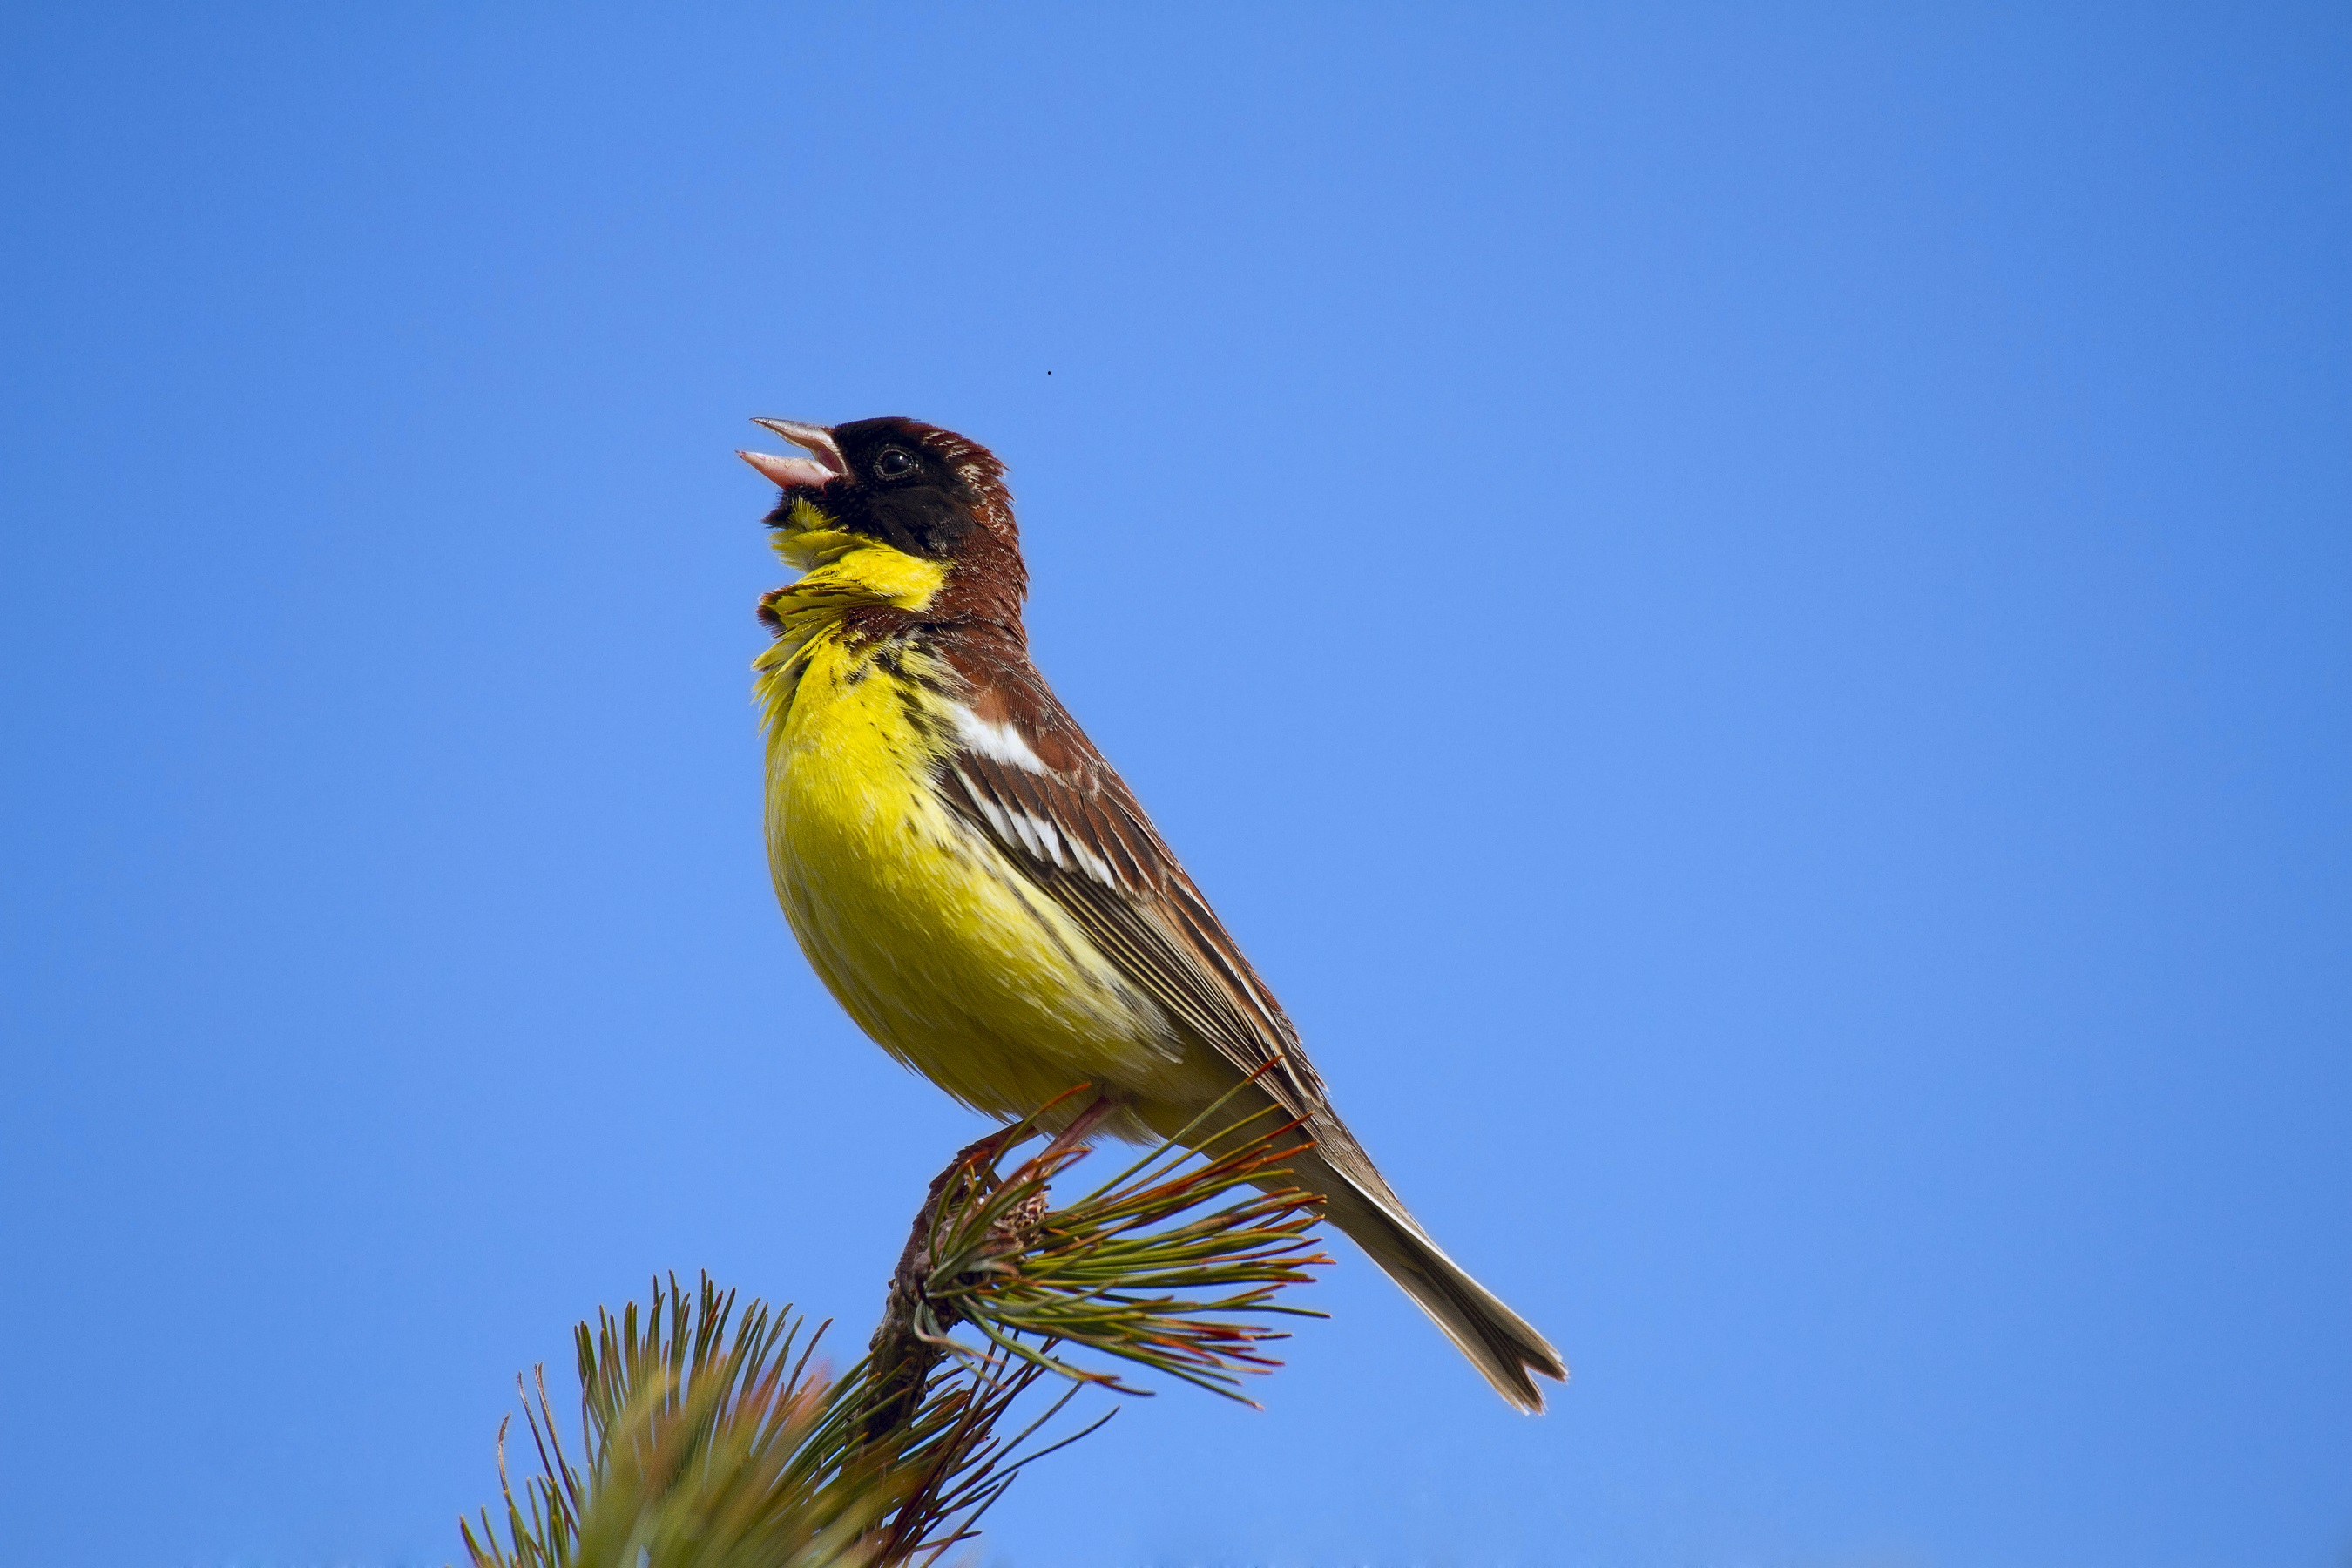 Yellow-breasted Bunting male singing on a branch of  dwarf pine, against a bright blue sky